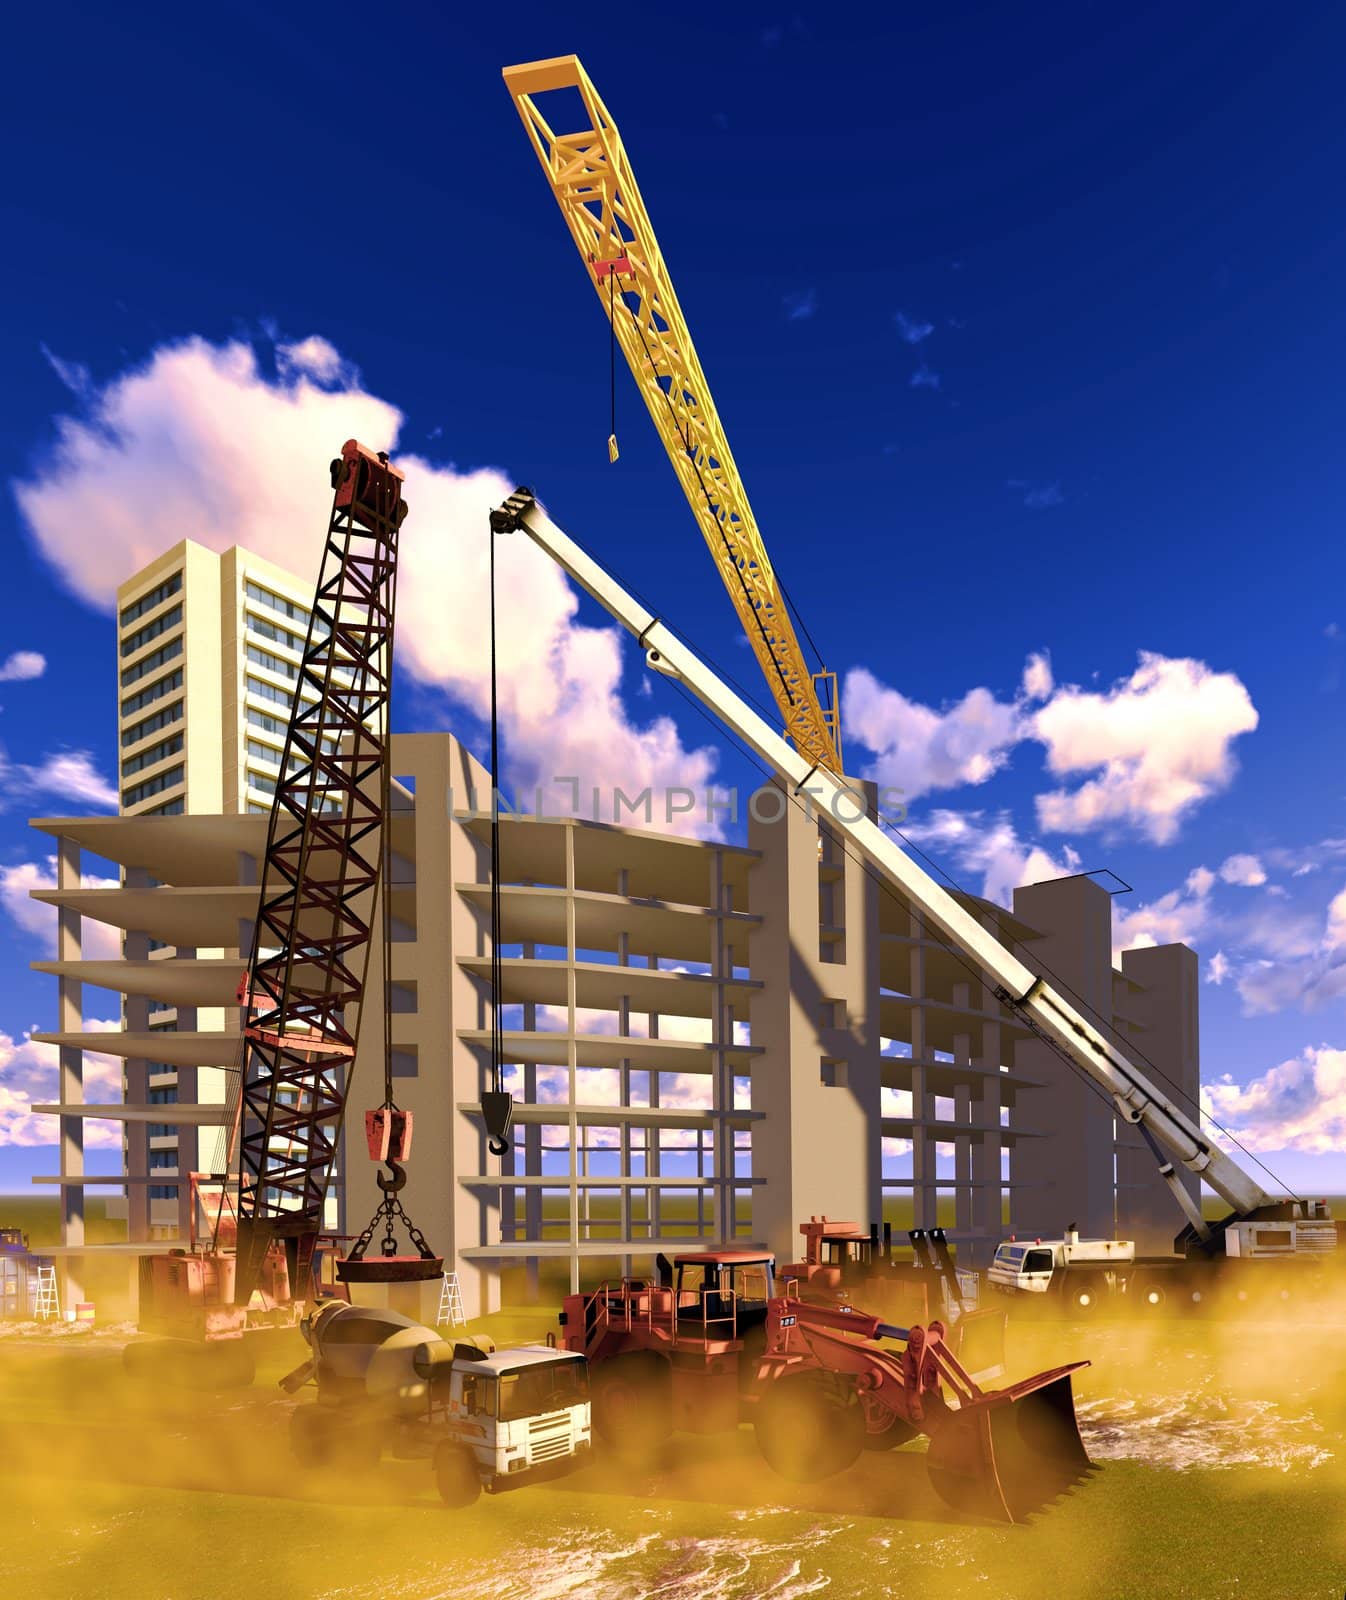 Construction site with white clouds ibehind